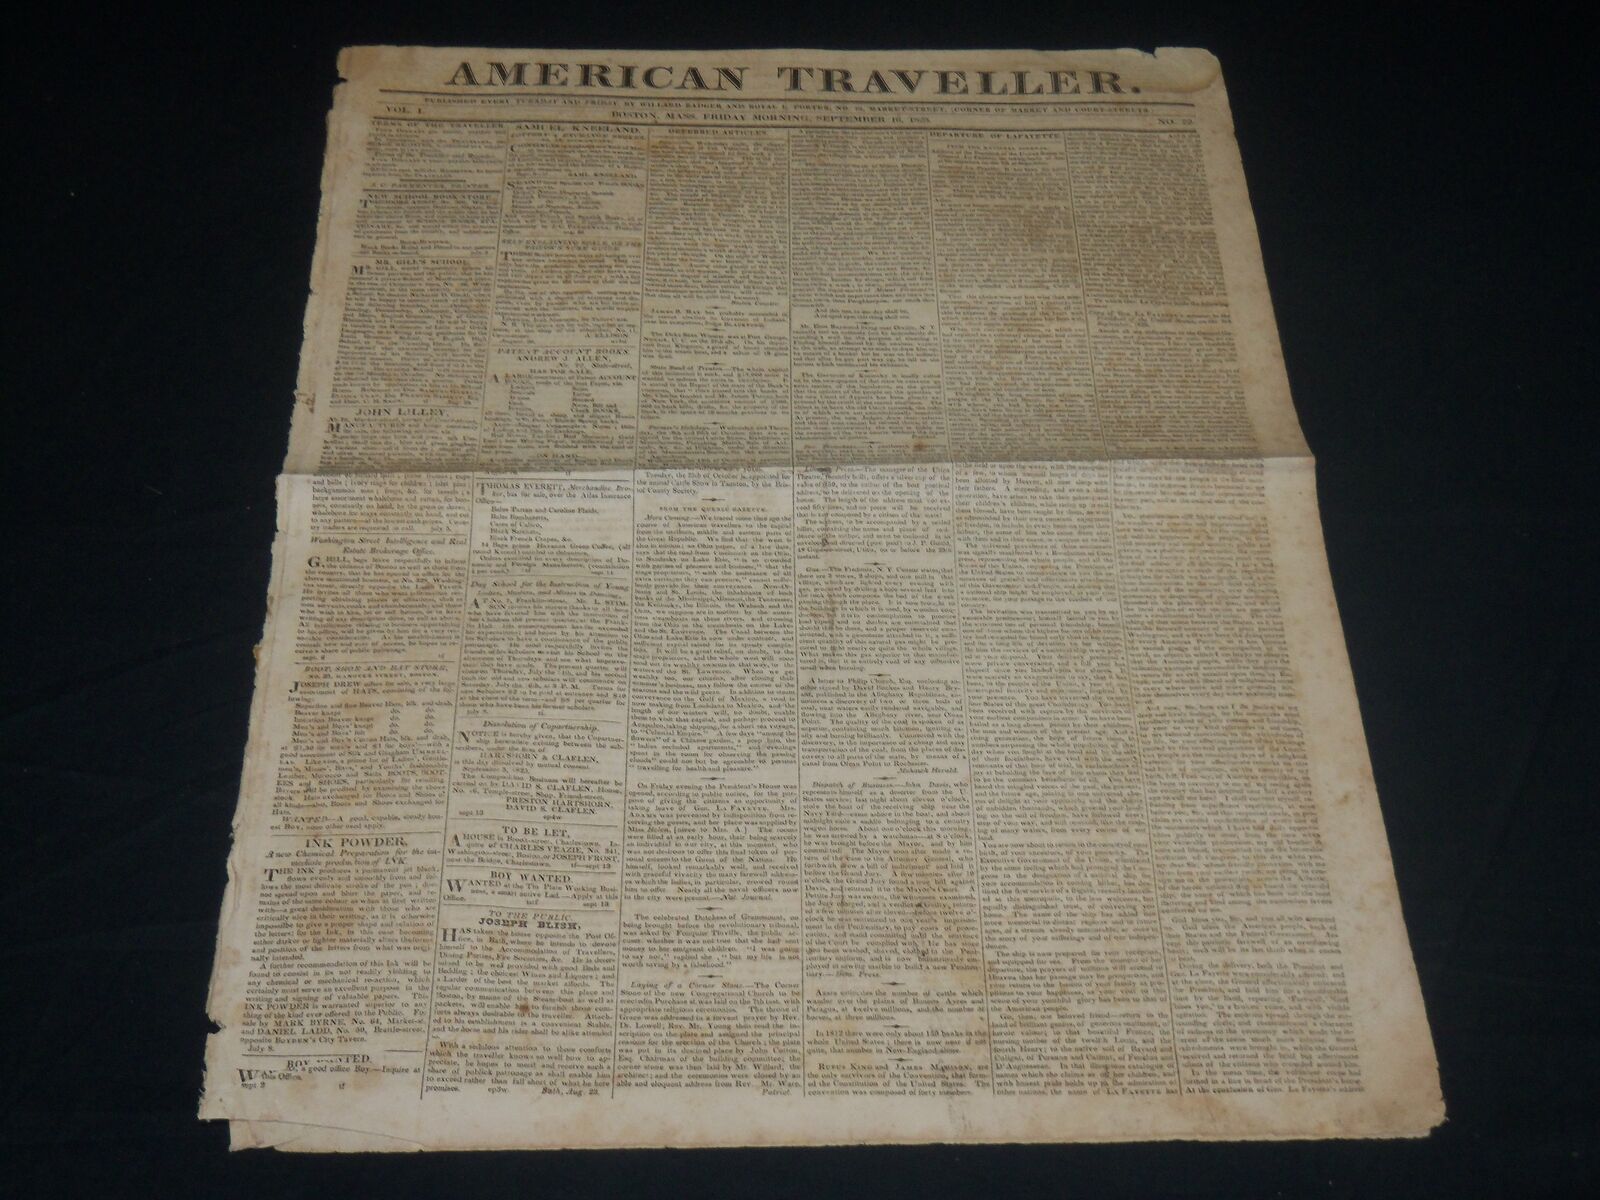 1825 SEPT 16 AMERICAN TRAVELLER NEWSPAPER - LA FAYETTE ANSWER TO PRES. - NP 4830